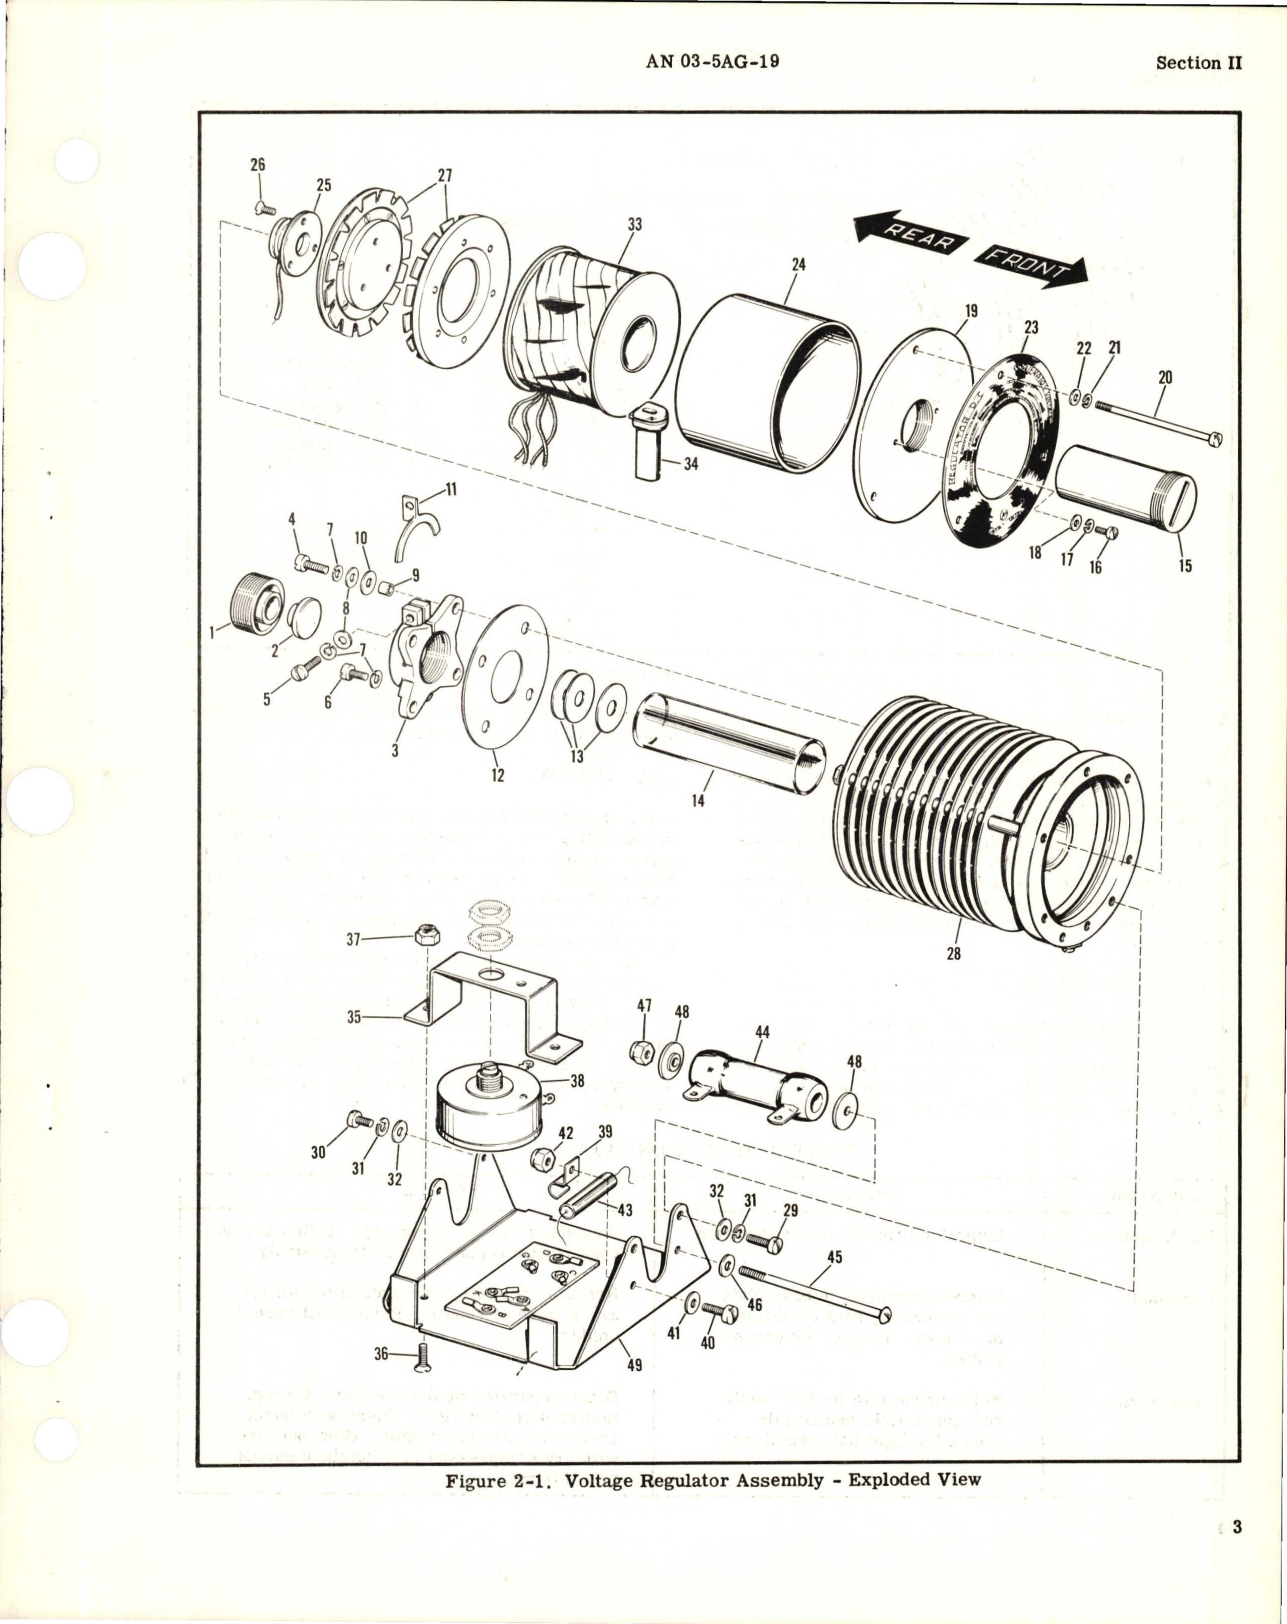 Sample page 5 from AirCorps Library document: Overhaul Instructions for Voltage Regulator - Model GR28 